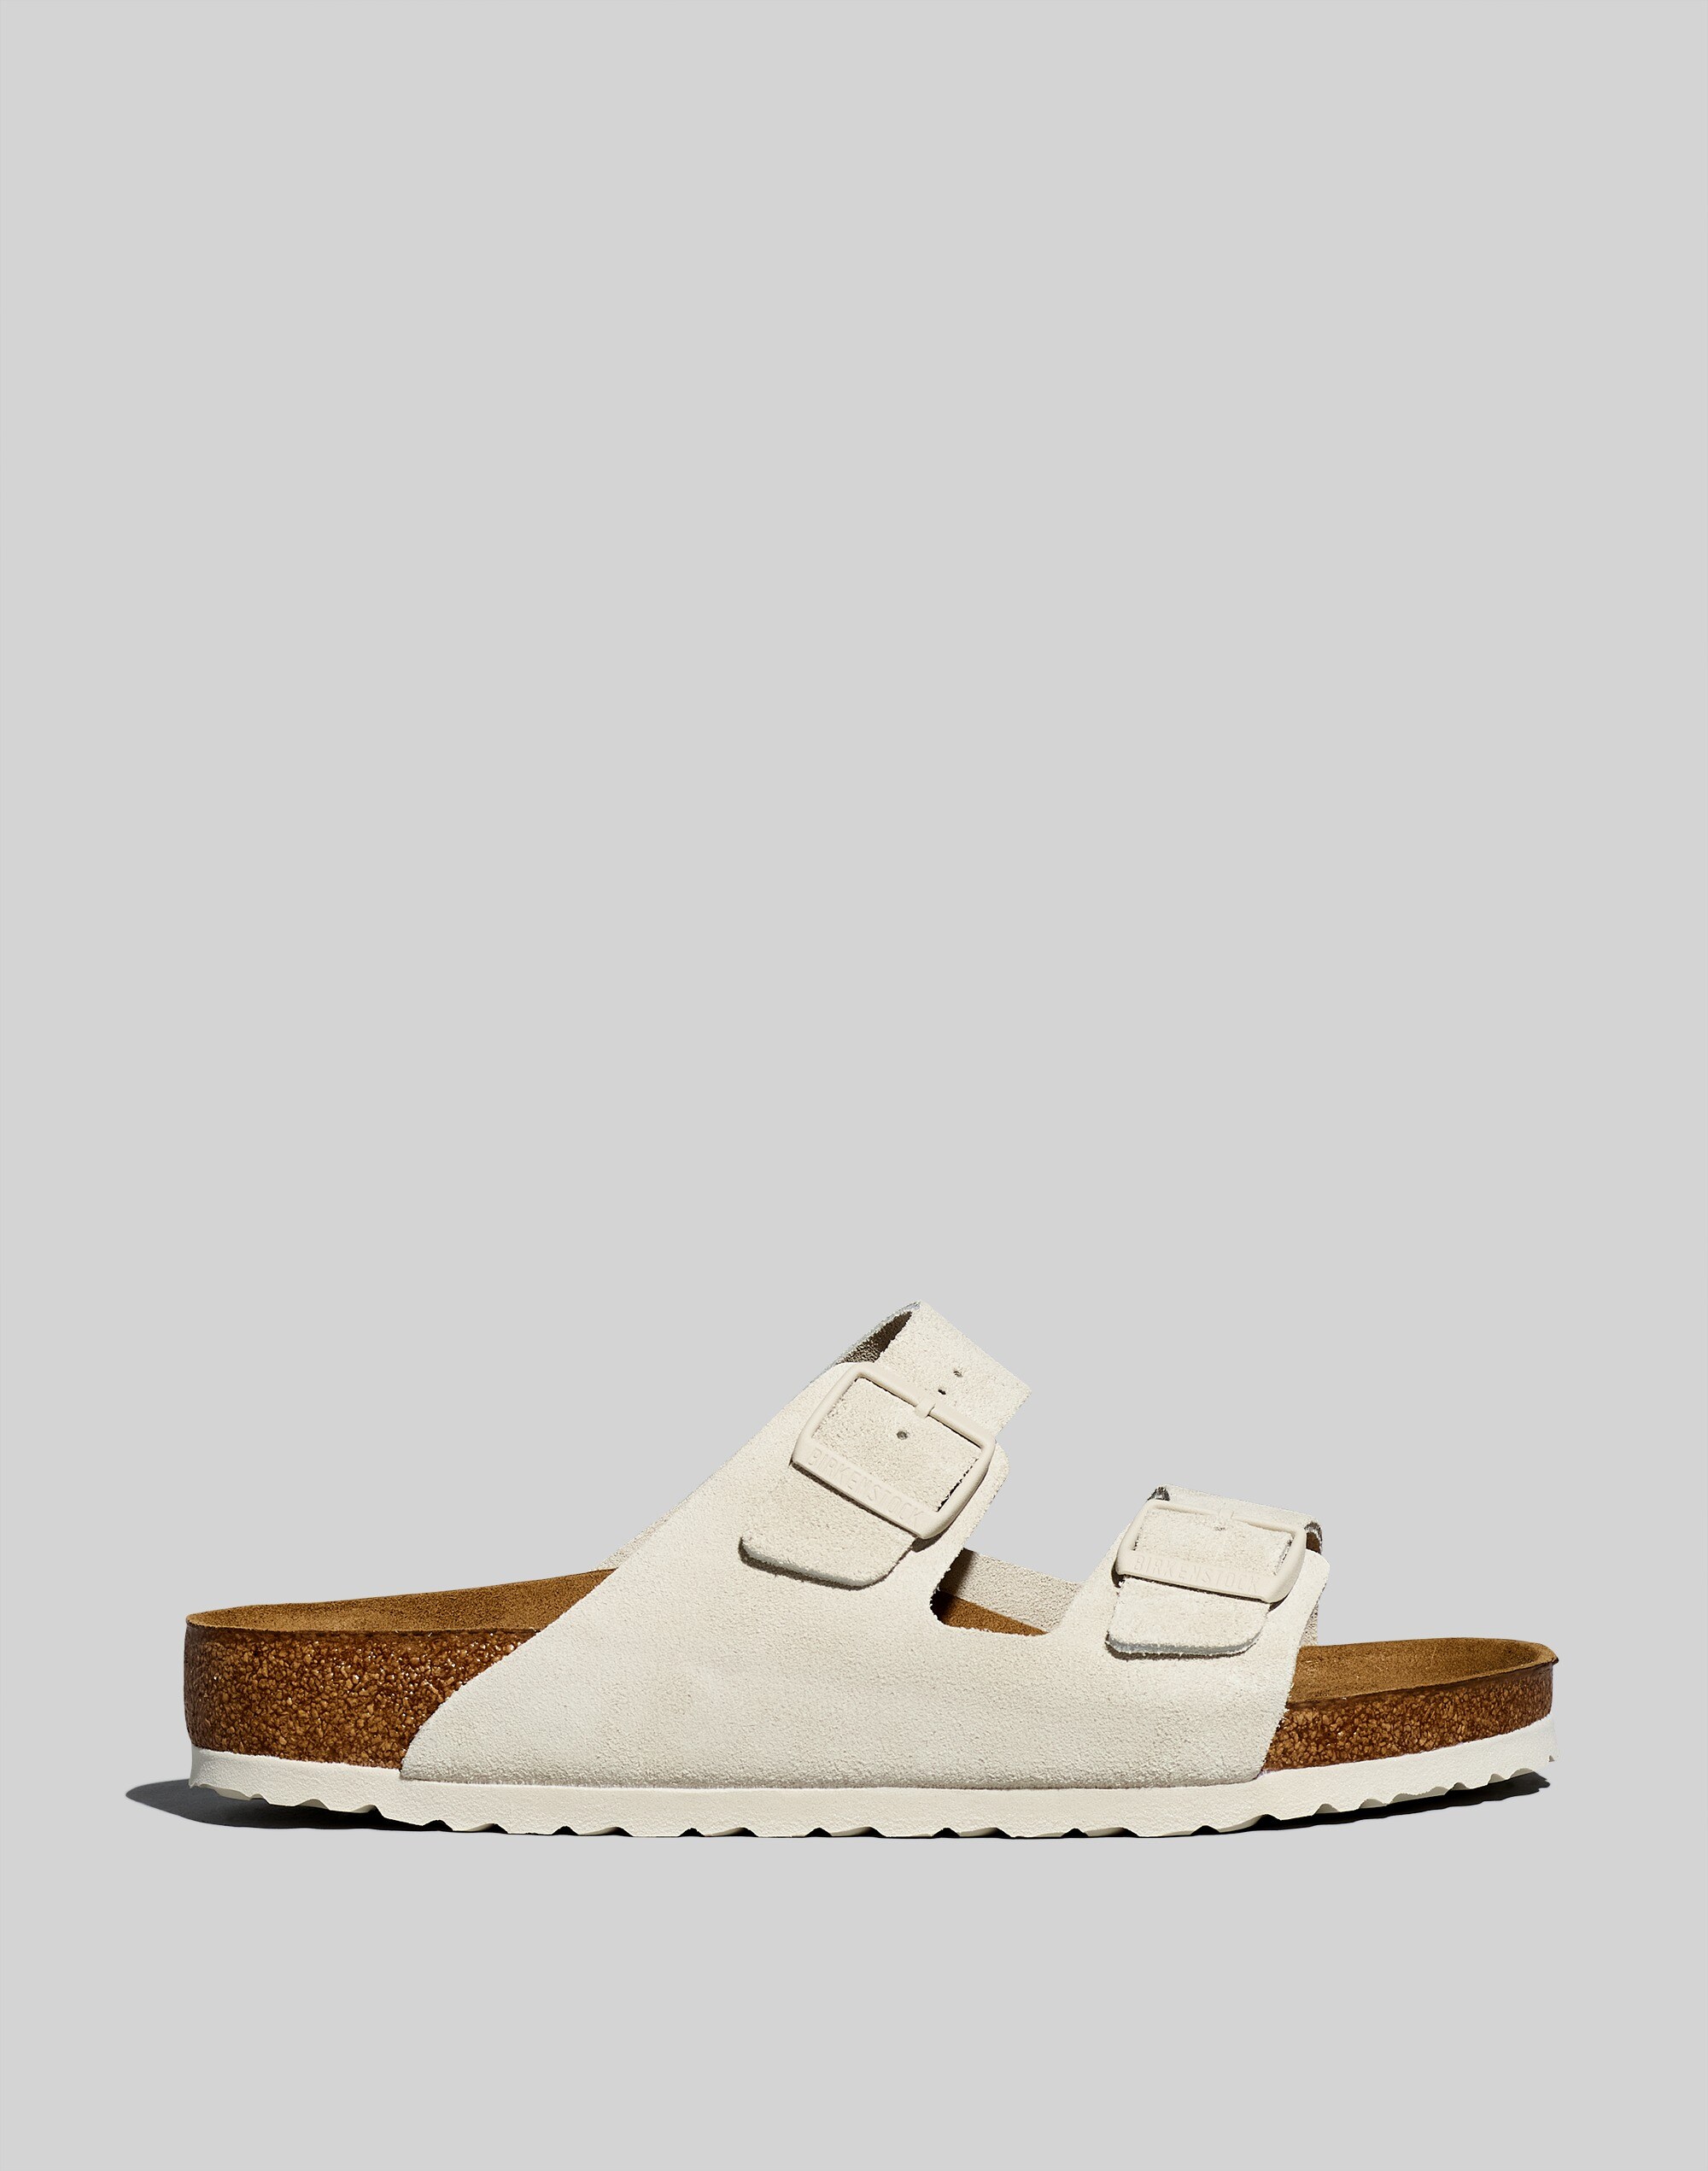 Arizona Shearling Suede Leather Antique White